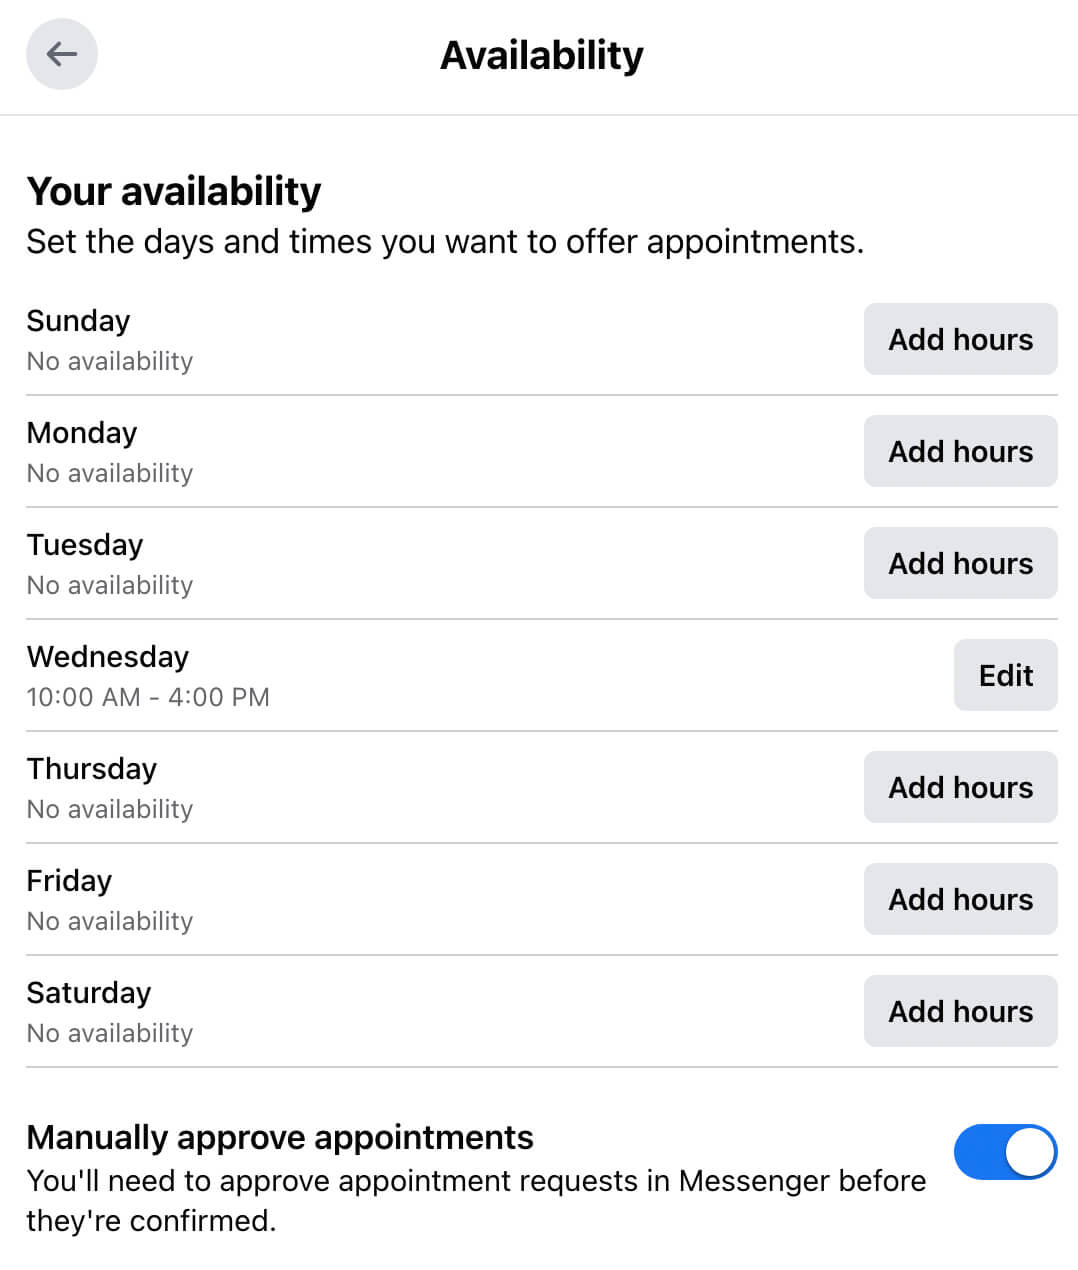 how-to-set-up-a-book-now-or-reserve-action-button-with-new-facebook-pages-experience-set-up-appointments-scheduling-tool-edit-availability-input-schedule-approve-appointments-example-13